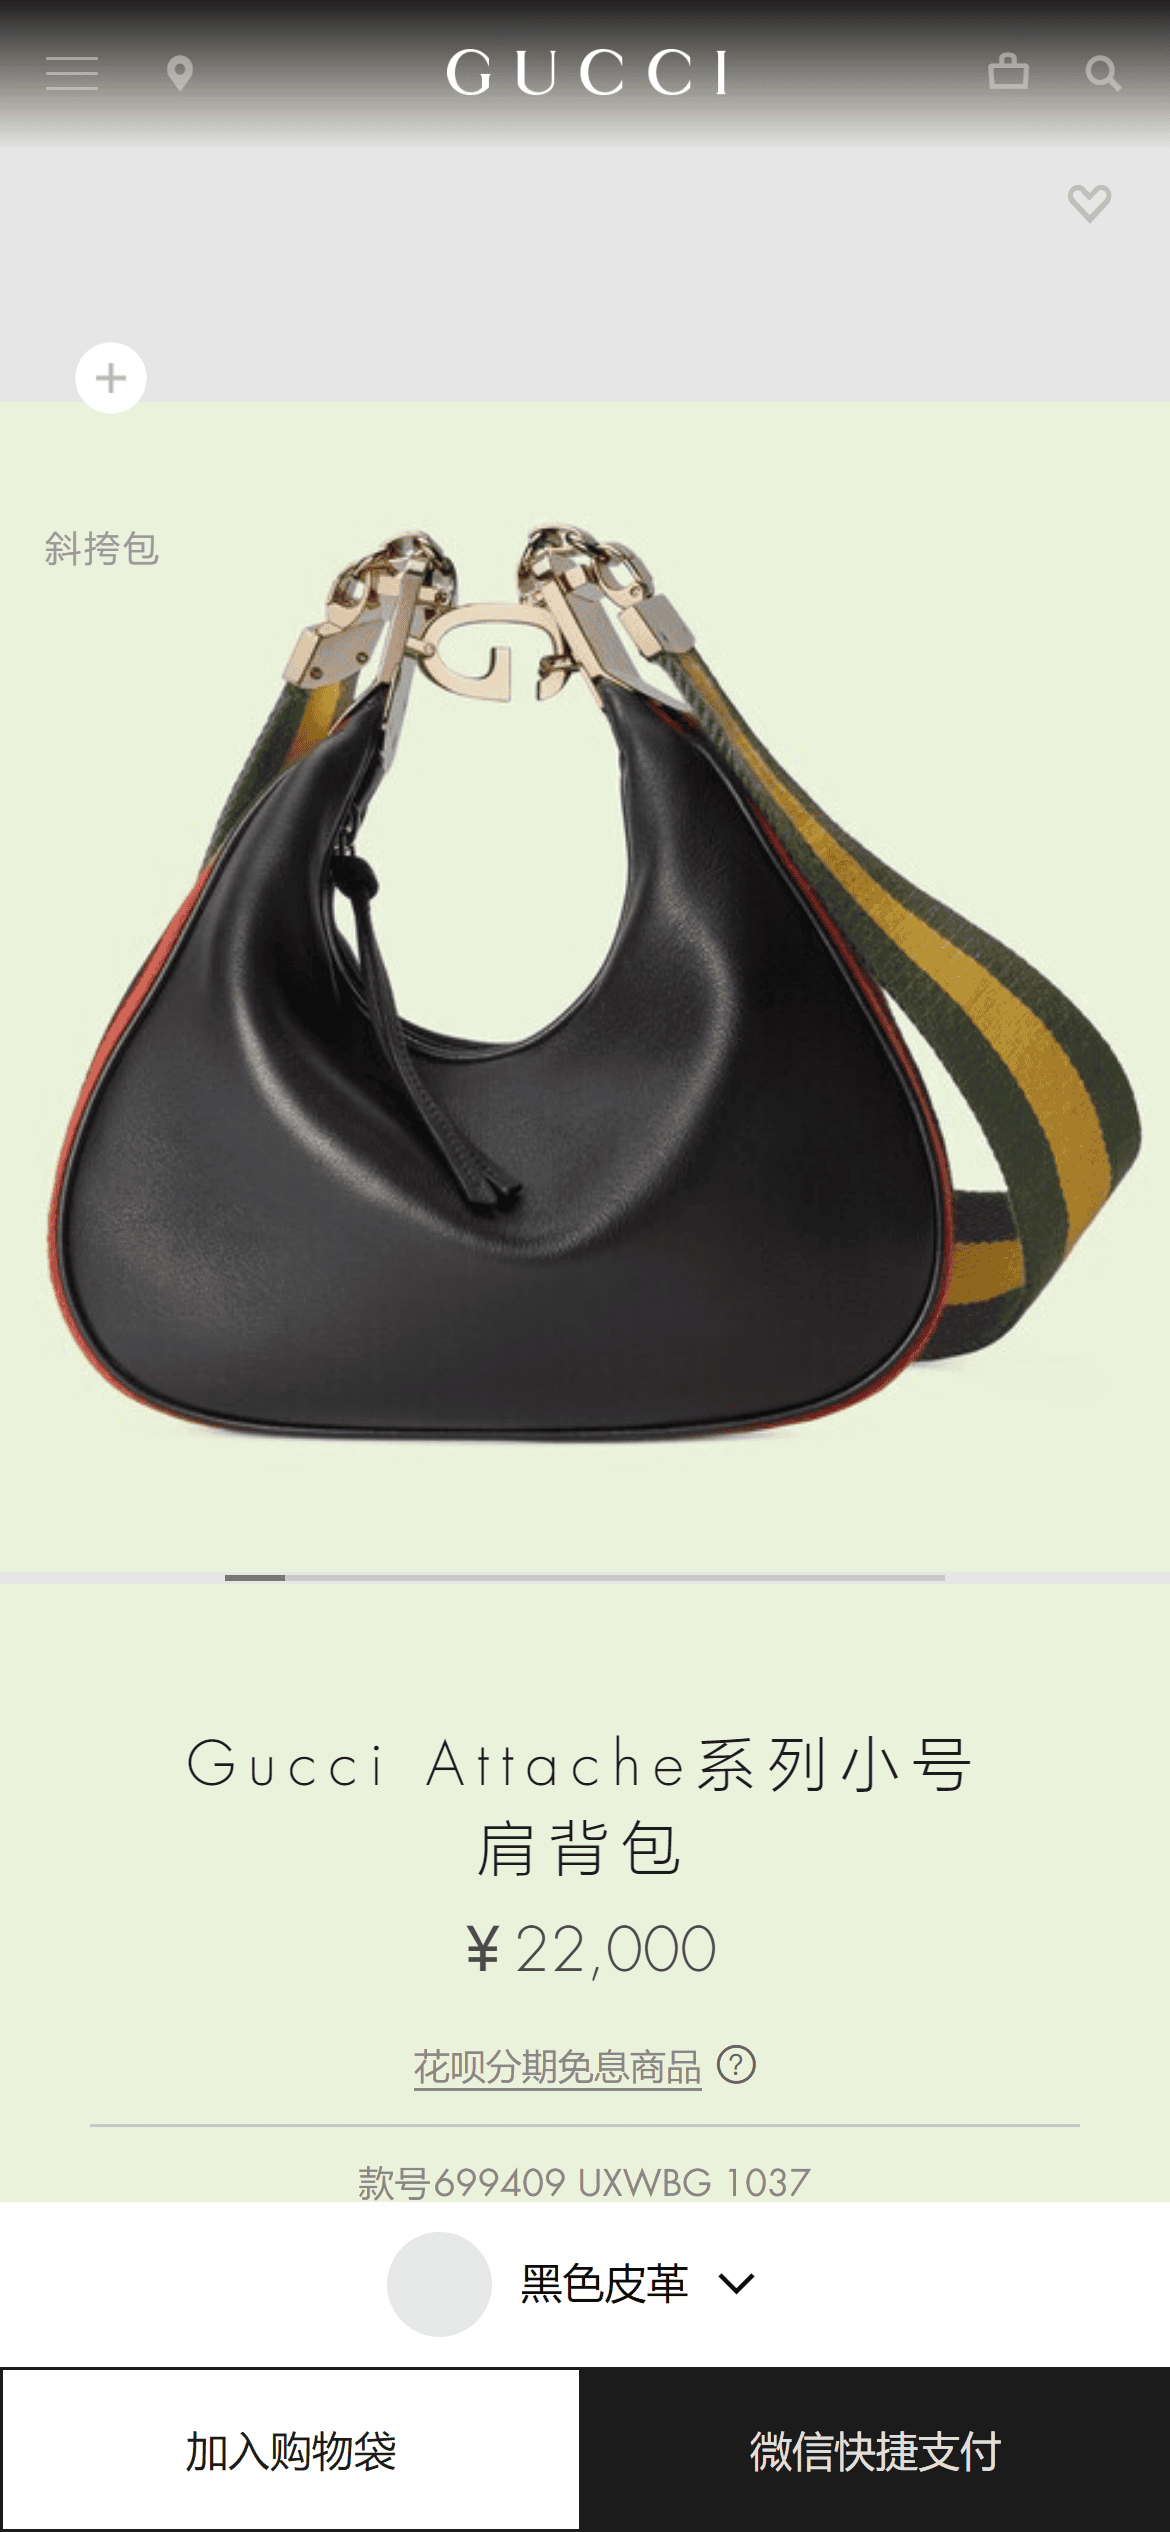 www.gucci.cn_zh_pr_699409UXWBG1037_viewObtained1listNameVariationOverlayiPhone-12-Pro.png